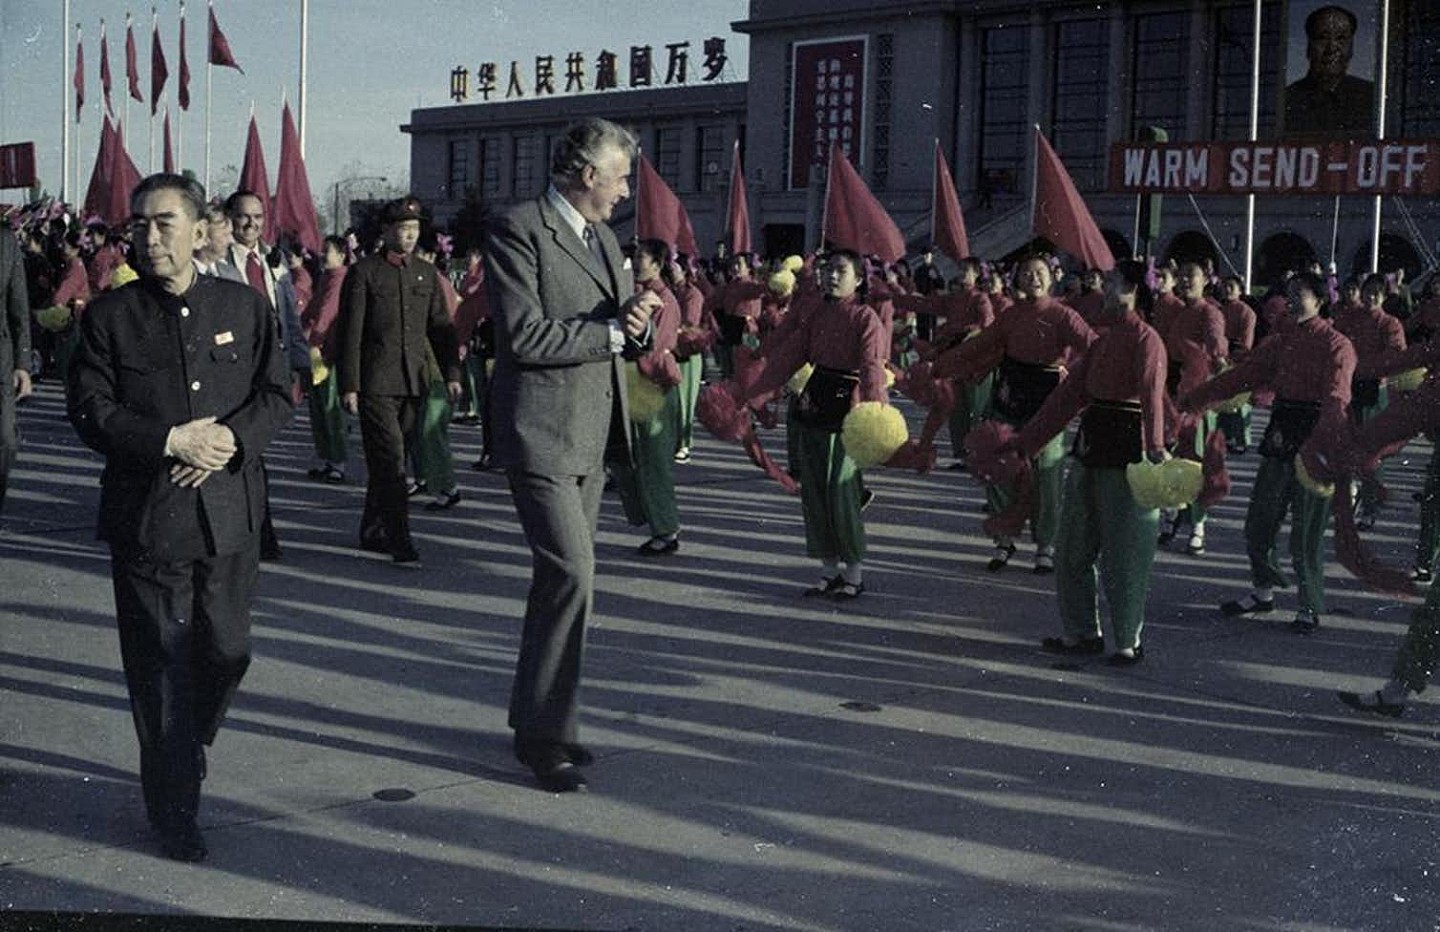 A 1973 photograph of Gough Whitlam and Premier Zhou Enlai surrounded by a parade of Chinese people holding flags